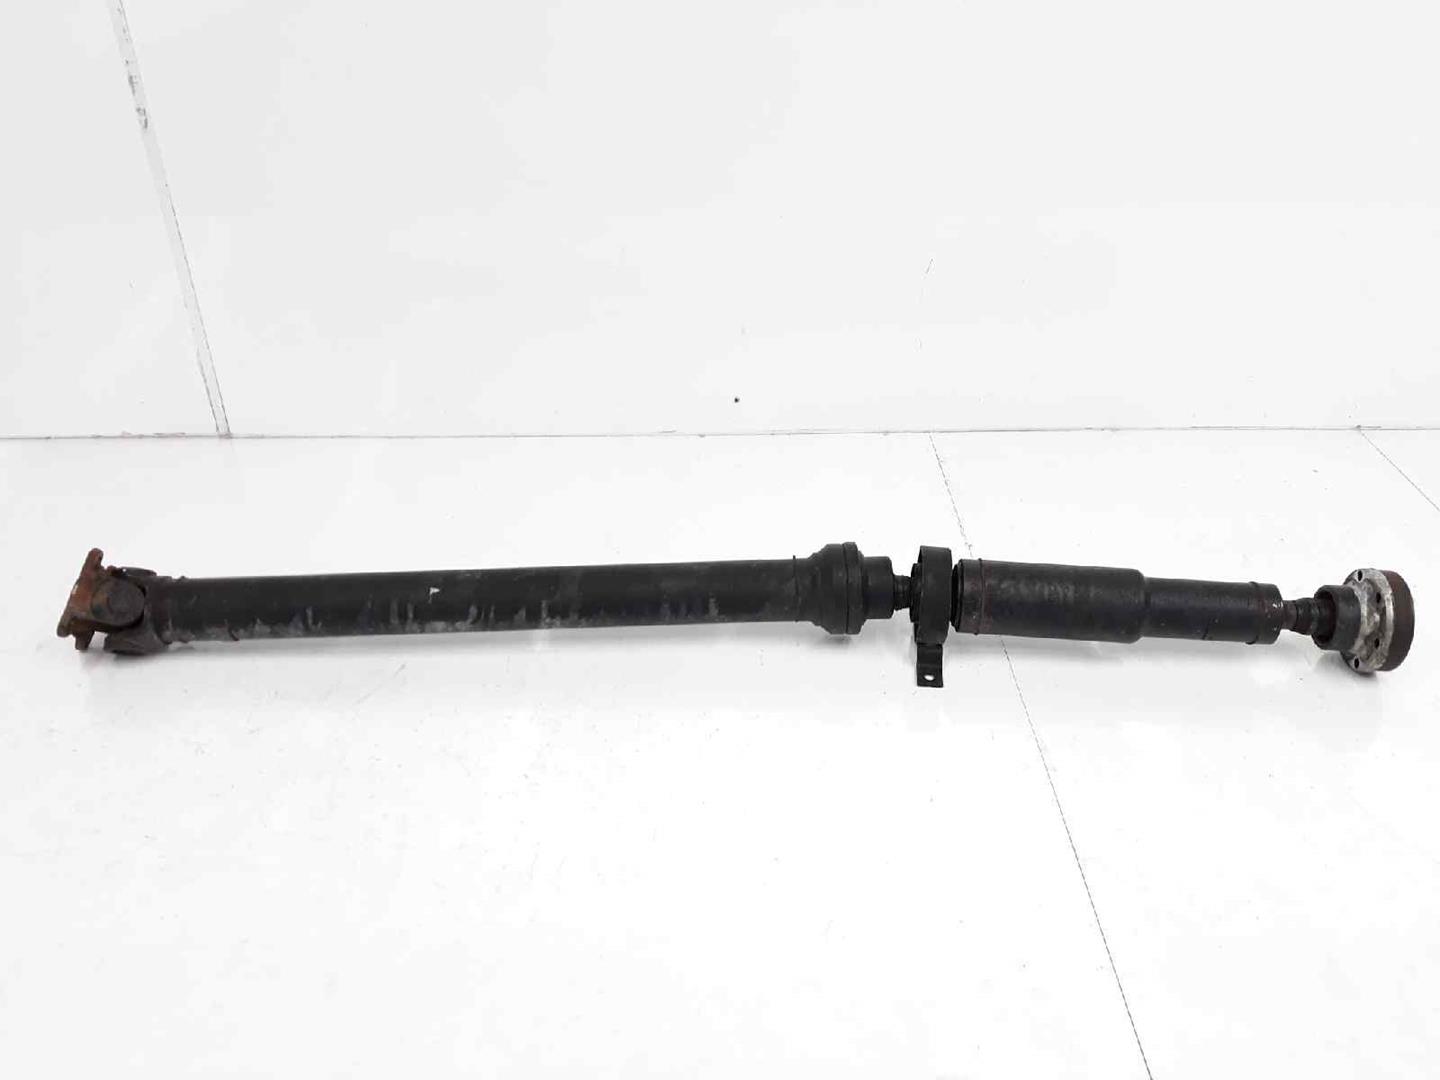 LAND ROVER Discovery 4 generation (2009-2016) Gearbox Short Propshaft 5H224365BA, TVB500360, LR037027 19677495